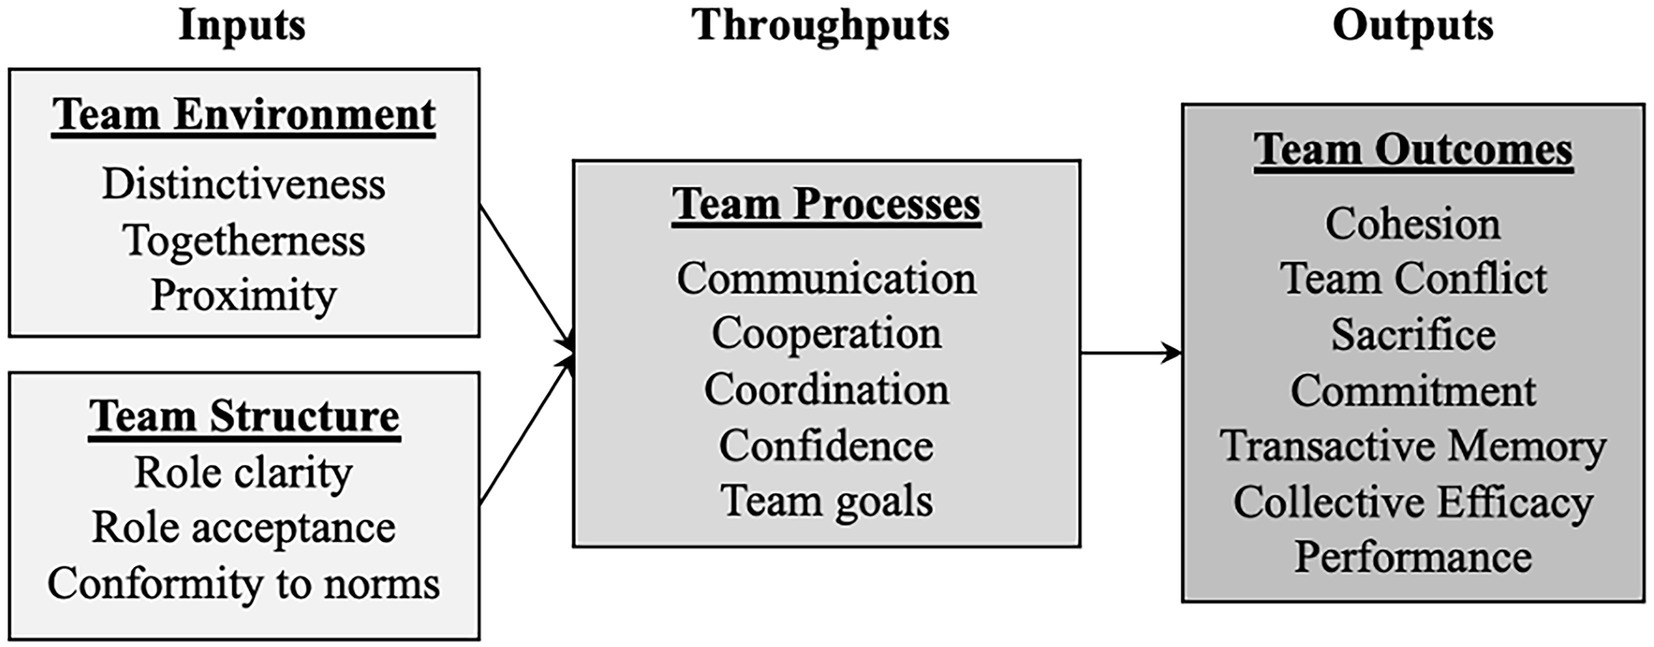 Frontiers An intervention program based on team building during tactical training tasks to improve team functioning